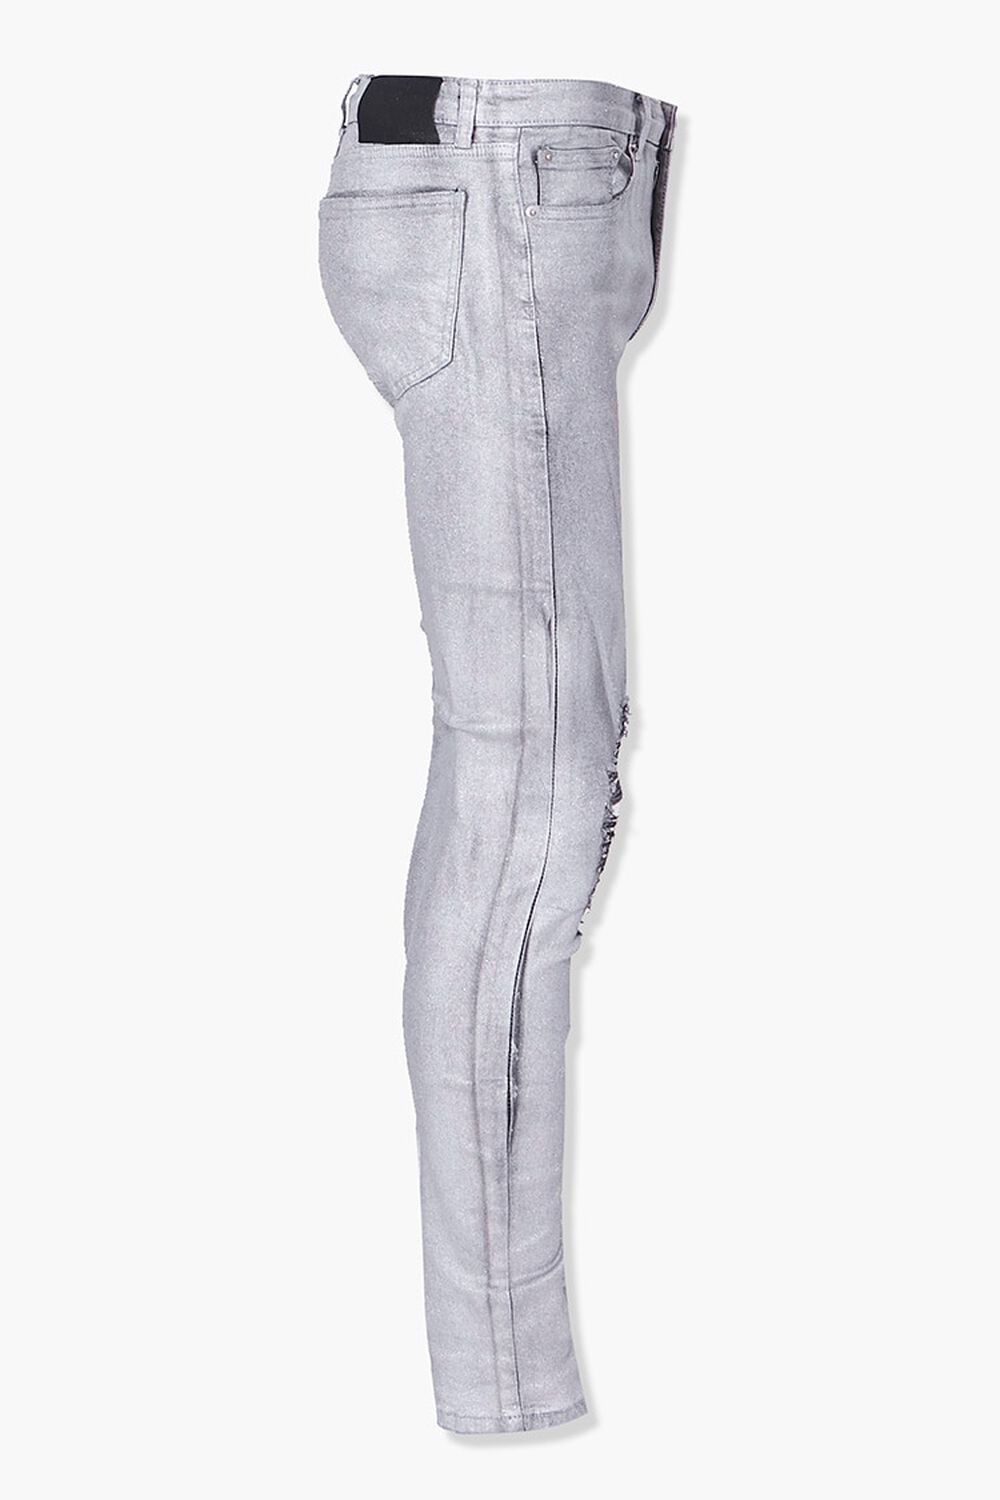 SILVER Distressed Coated Skinny Jeans, image 2